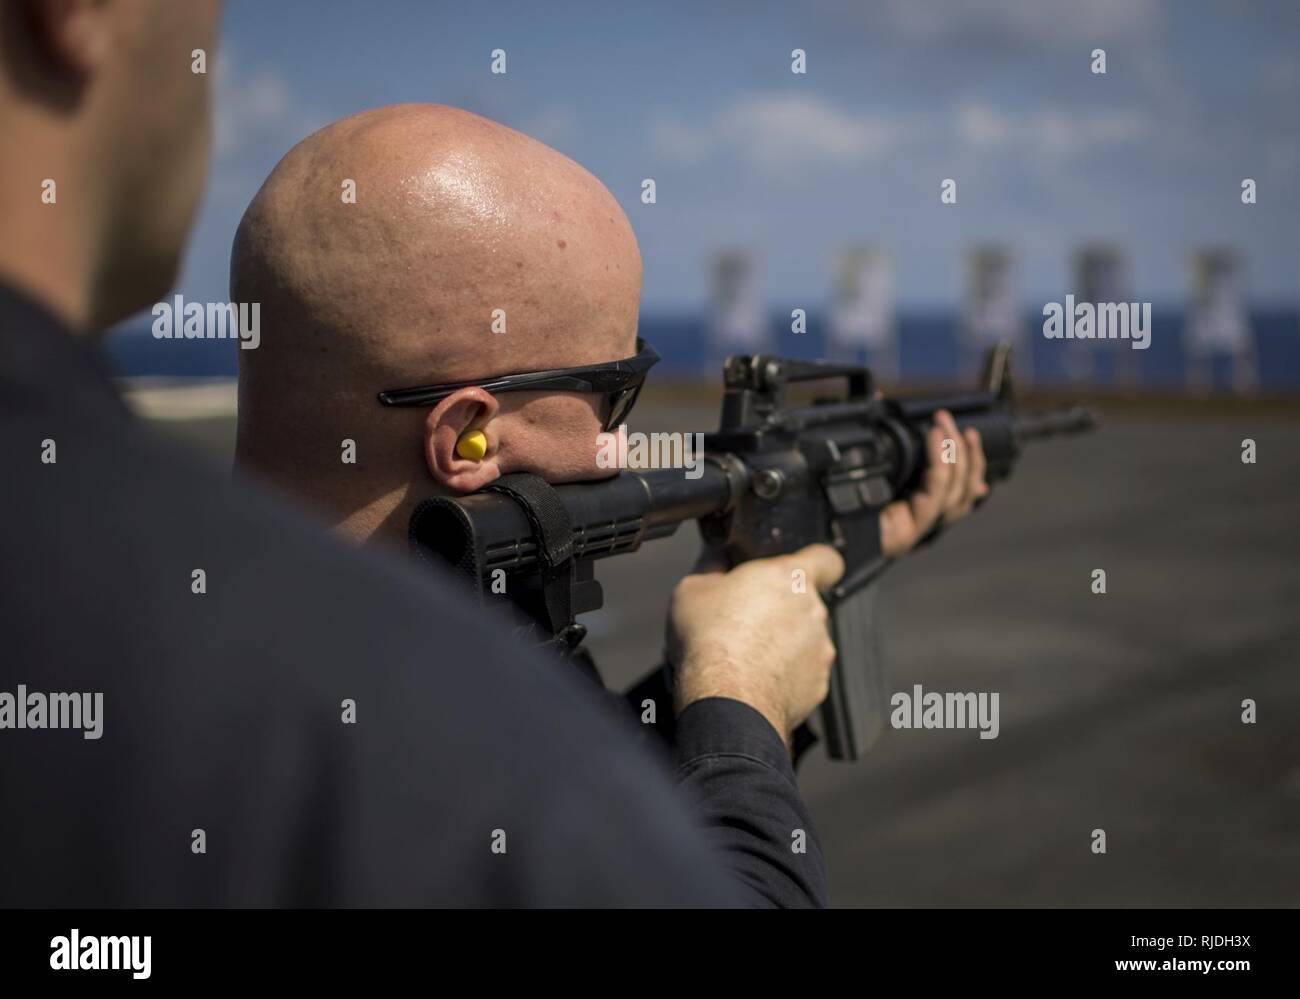 PACIFIC OCEAN (Jan. 21, 2018) Master-at-Arms 1st Class Cody Schilcher fires an M4A1 carbine during a small-arms qualification course on the flight deck of Nimitz-class aircraft carrier USS Carl Vinson (CVN 70). Carl Vinson Strike Group is currently operating in the Pacific as part of a regularly scheduled deployment. Stock Photo